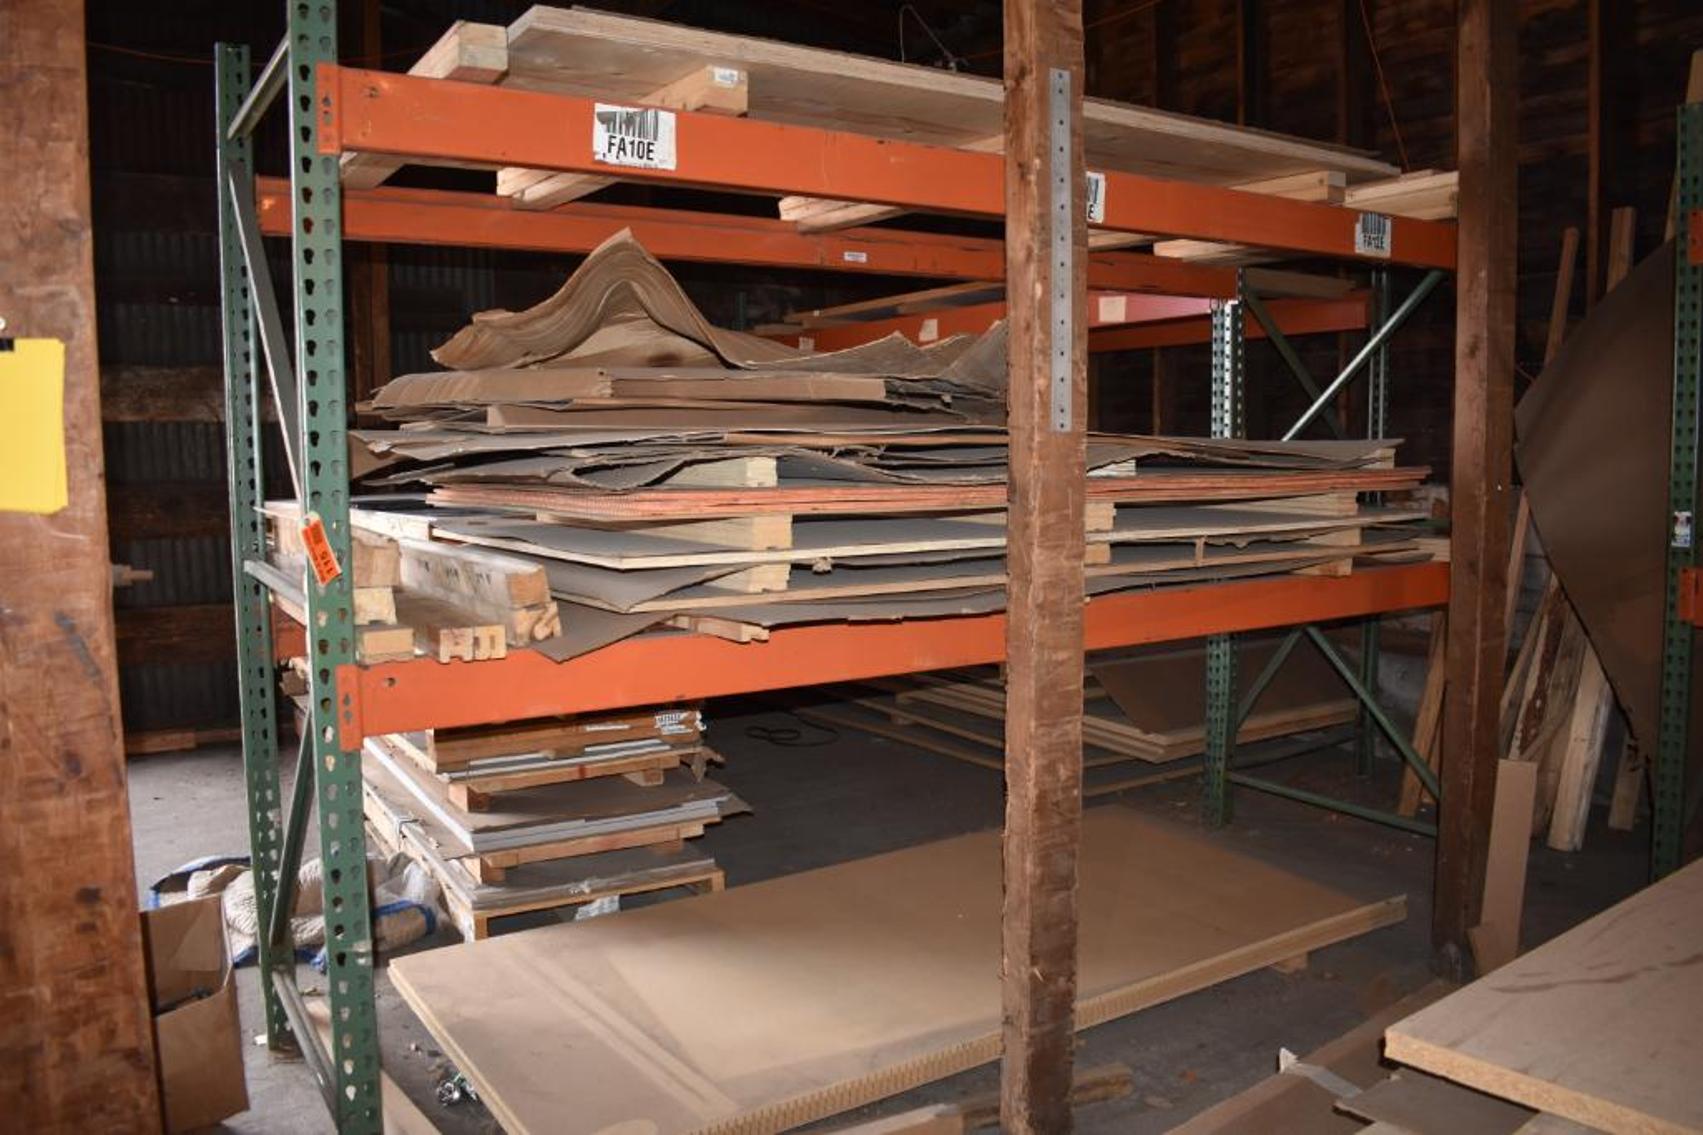 Aaron Carlson Millwork & Architectural Design Moving Sale Phase 2, Dock Carts and Clamps Galore, Plus More